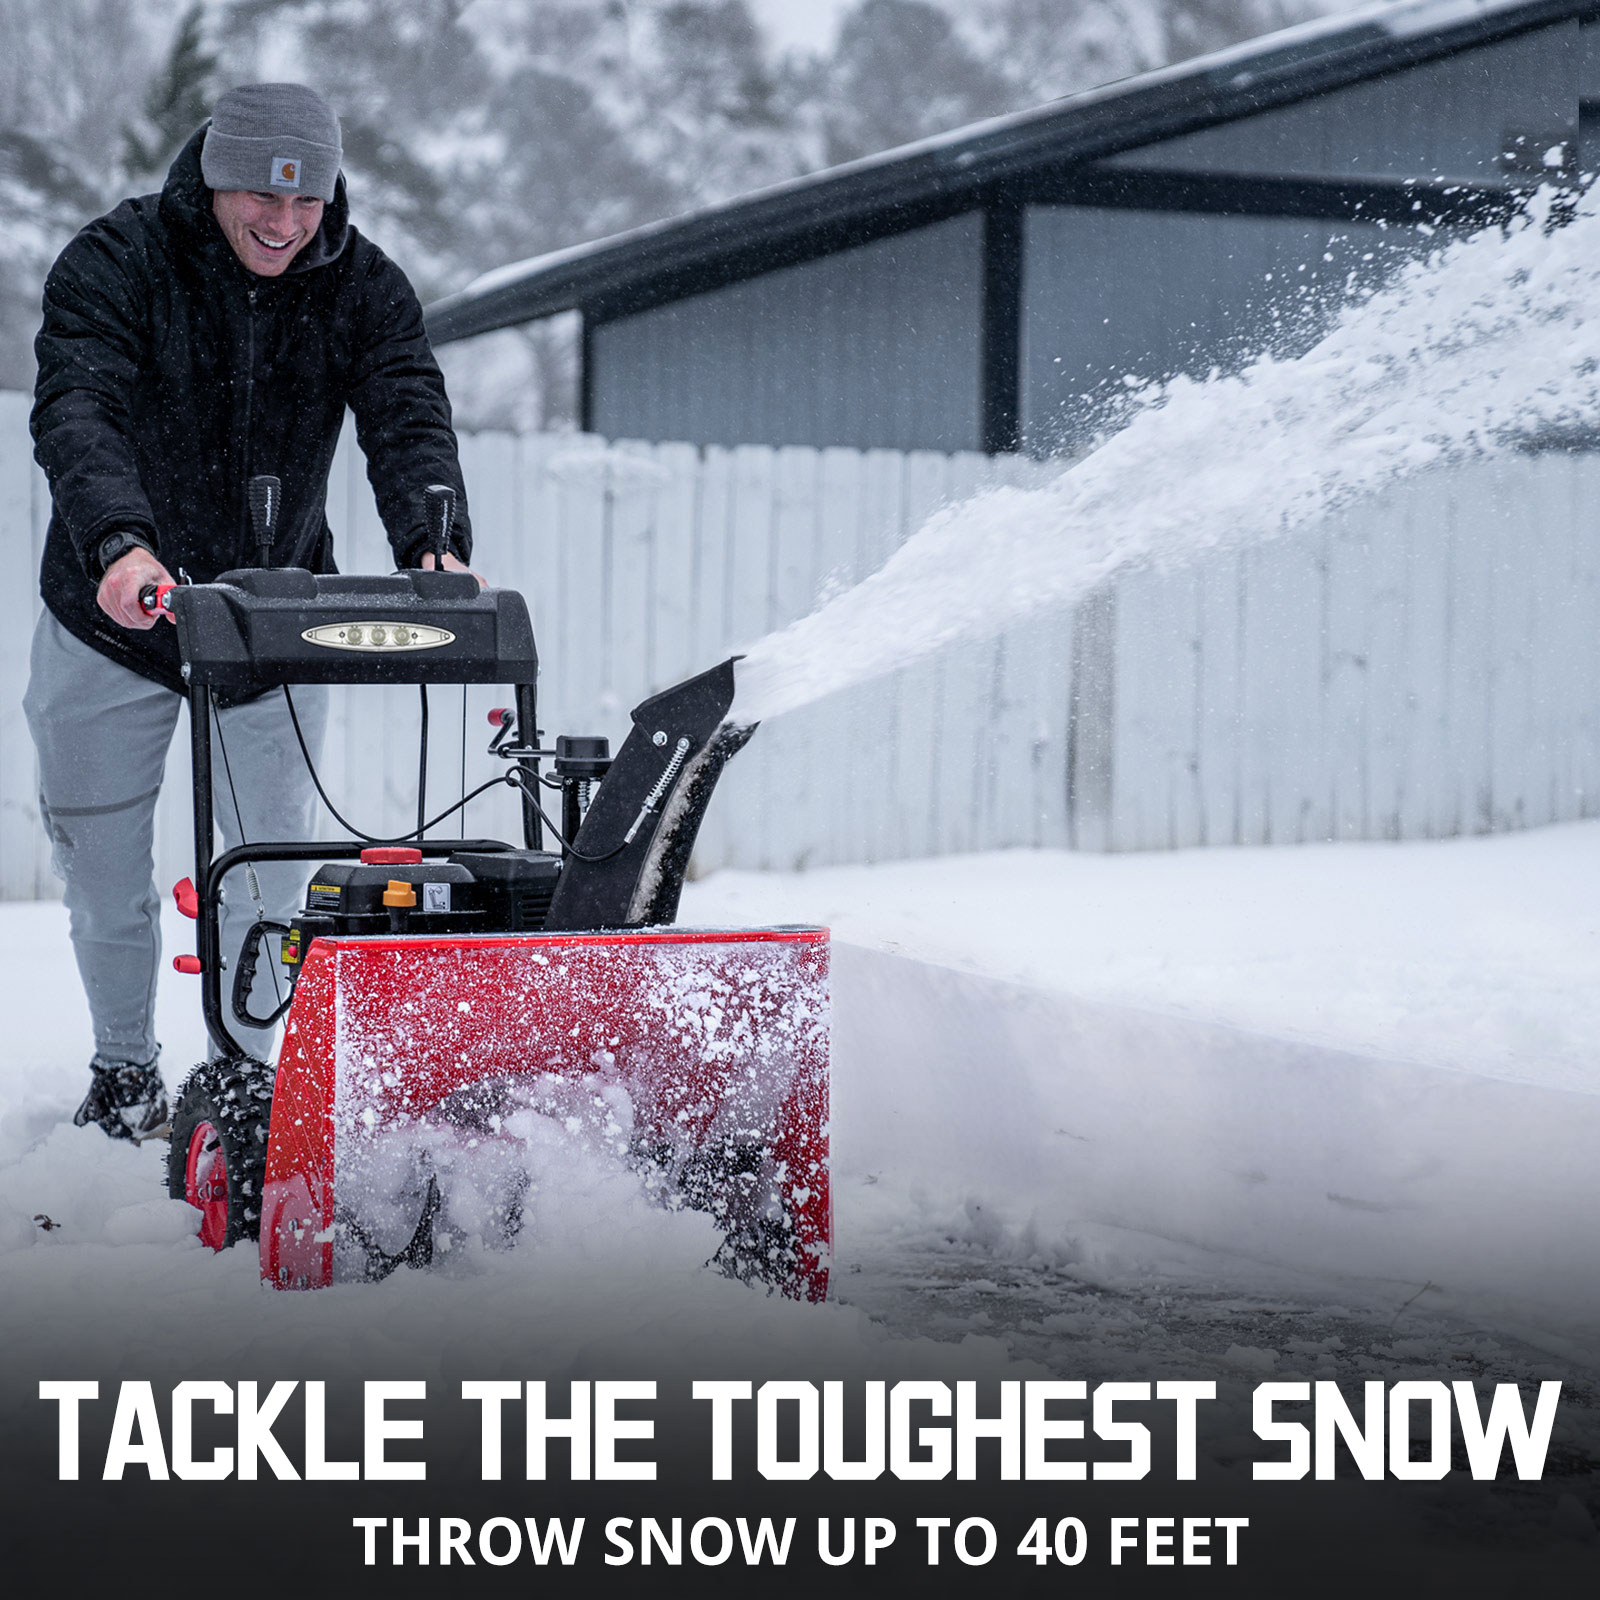 PowerSmart Gas Snow Blower: 24 in. Two-Stage, Electric Start, 212CC Self-Propelled Snow Blower with LED Headlight - image 5 of 9